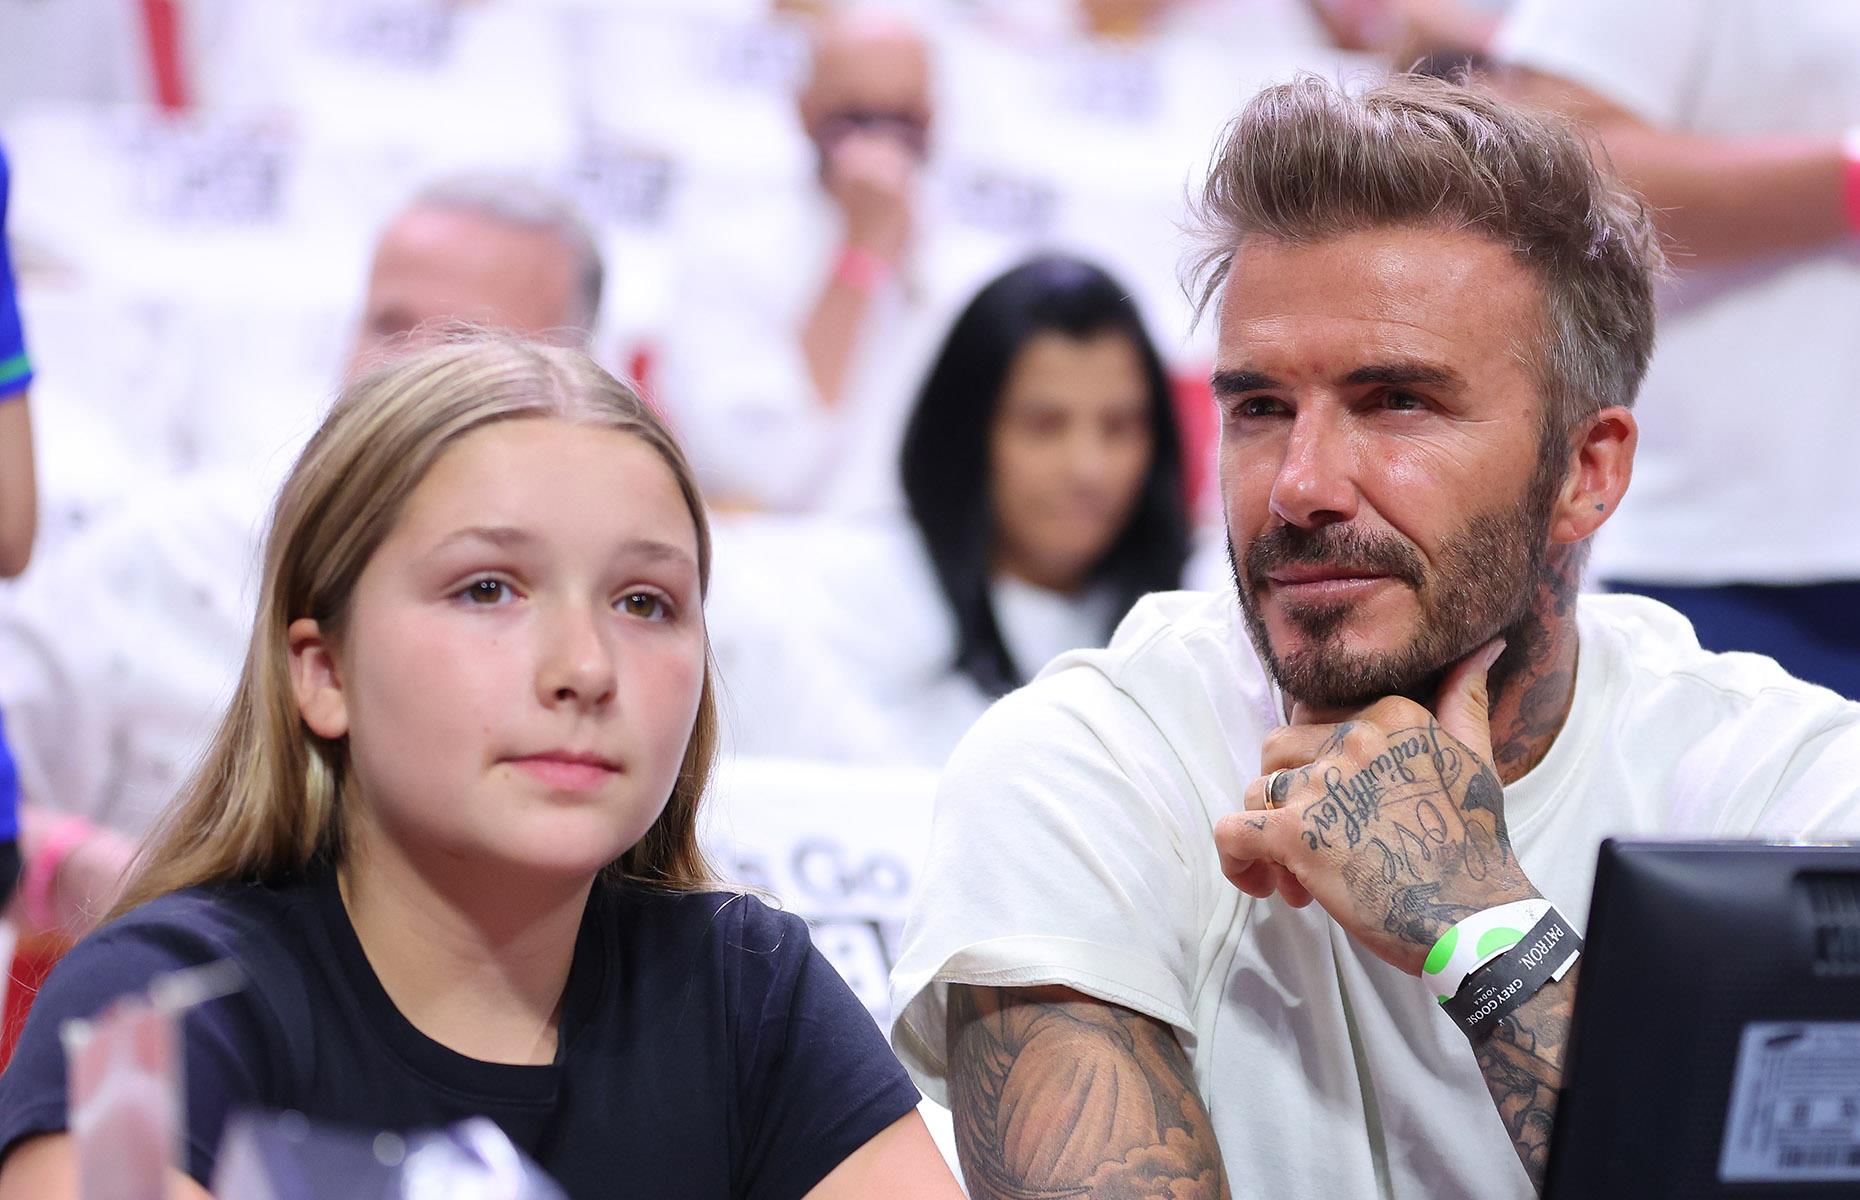 David Beckham ventures out for some Christmas shopping at luxury